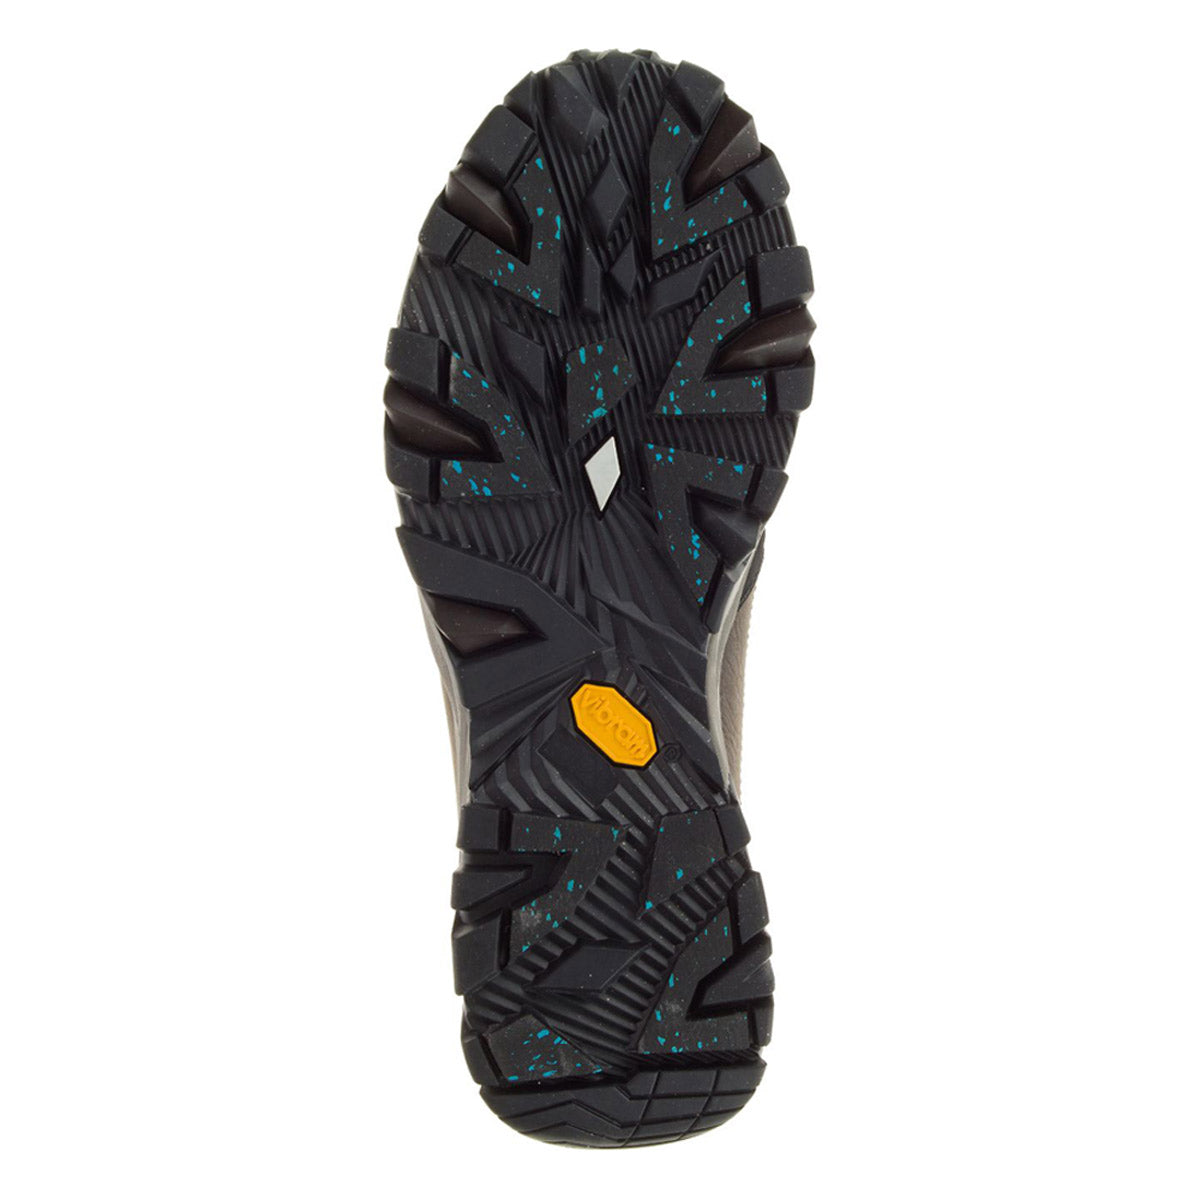 MERRELL COLDPACK ICE + MOC WP BROWN - MENS